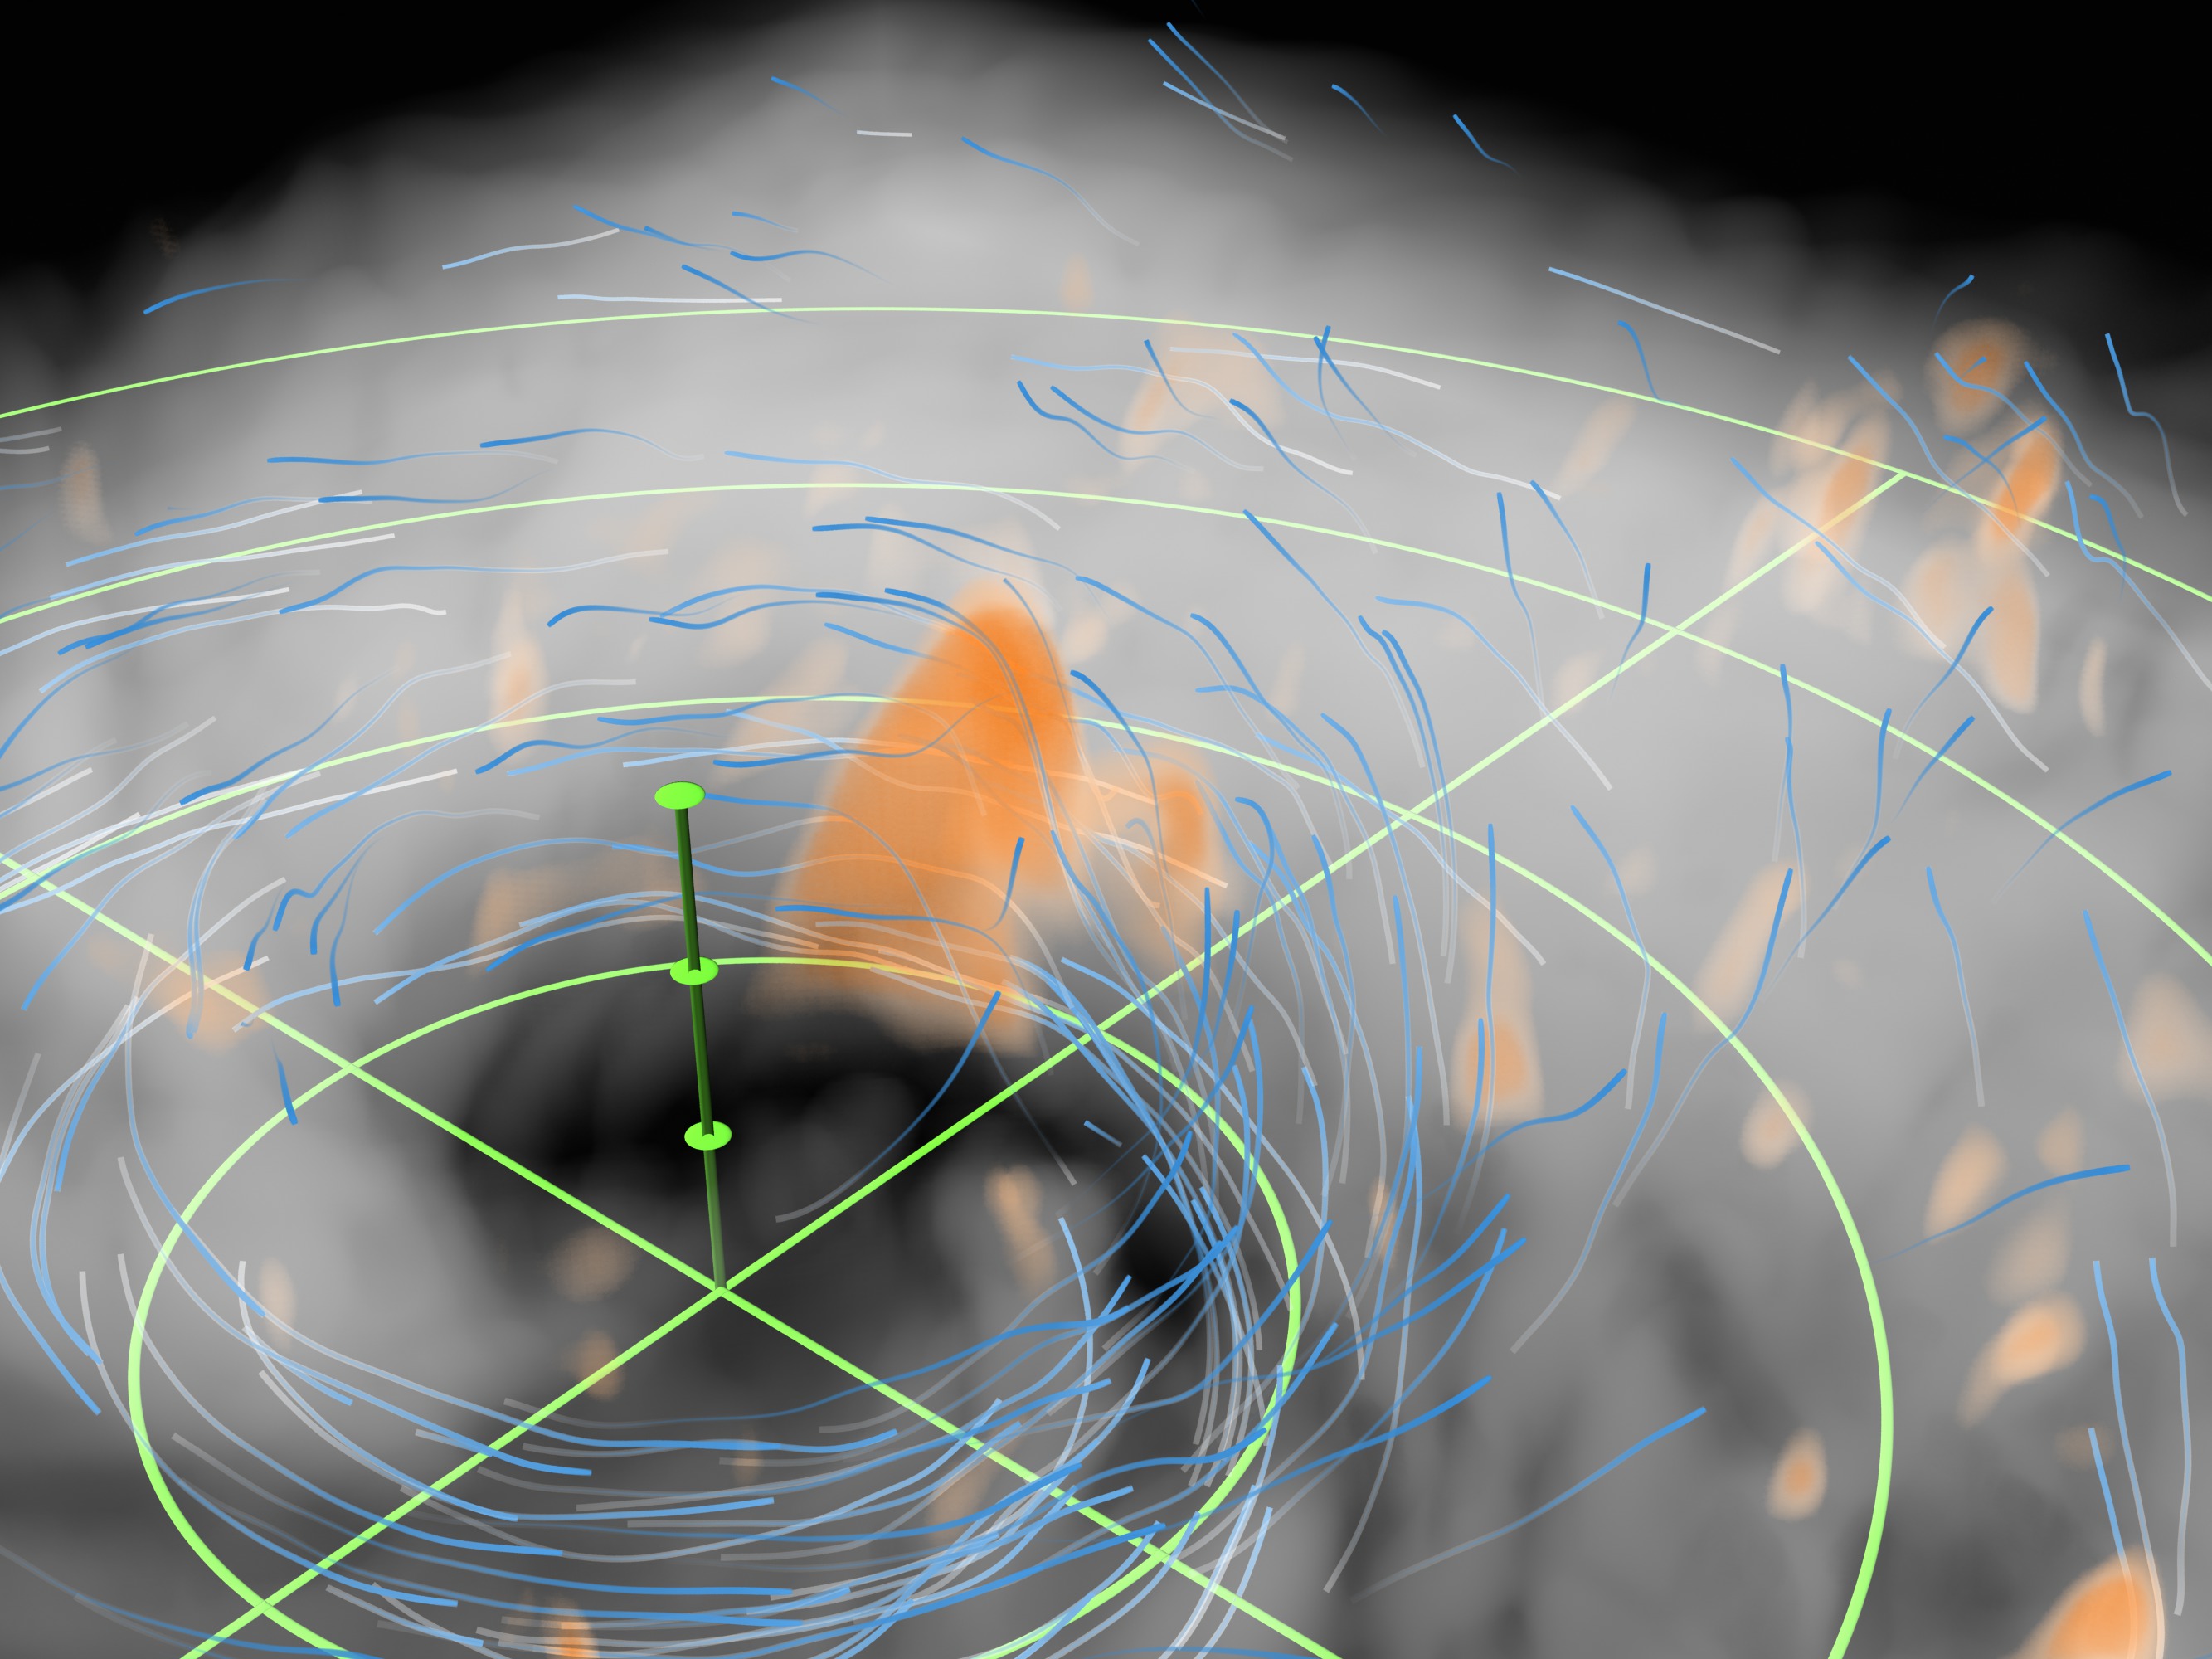 The Evolution of Observed Hurricane Eyewall Shapes - Eos